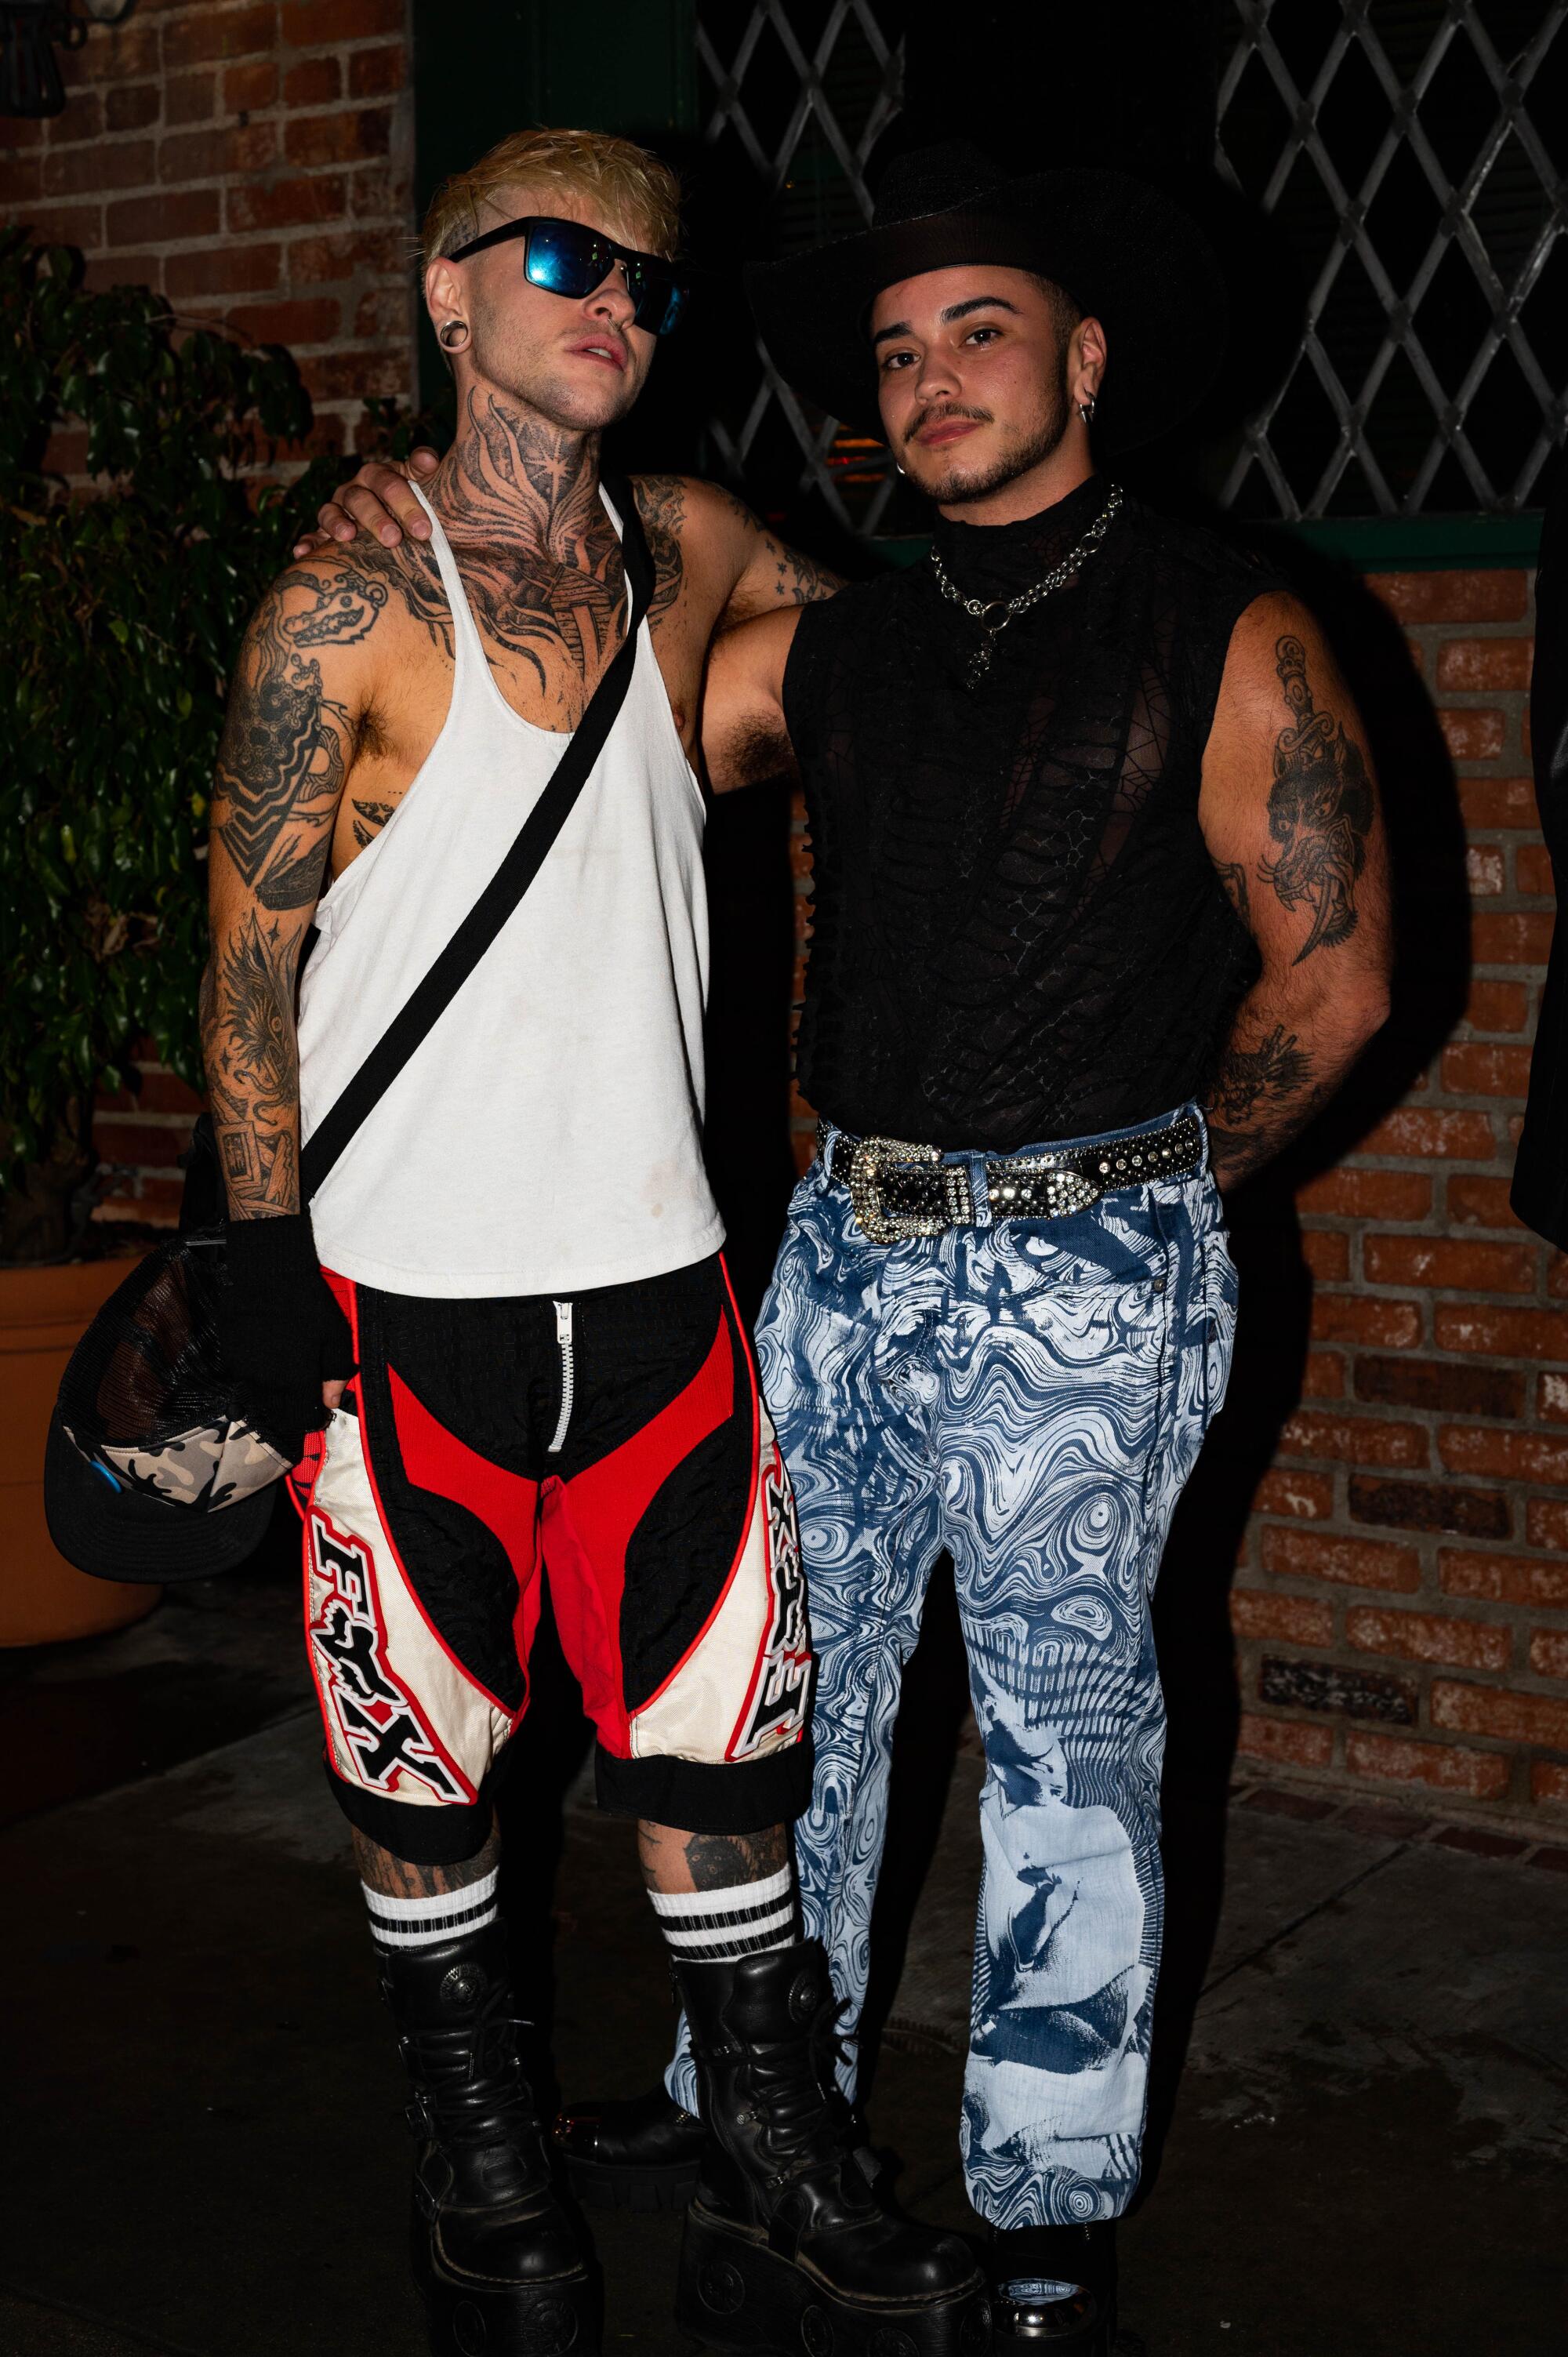 Two people wearing patterned pants pose side by side at night.